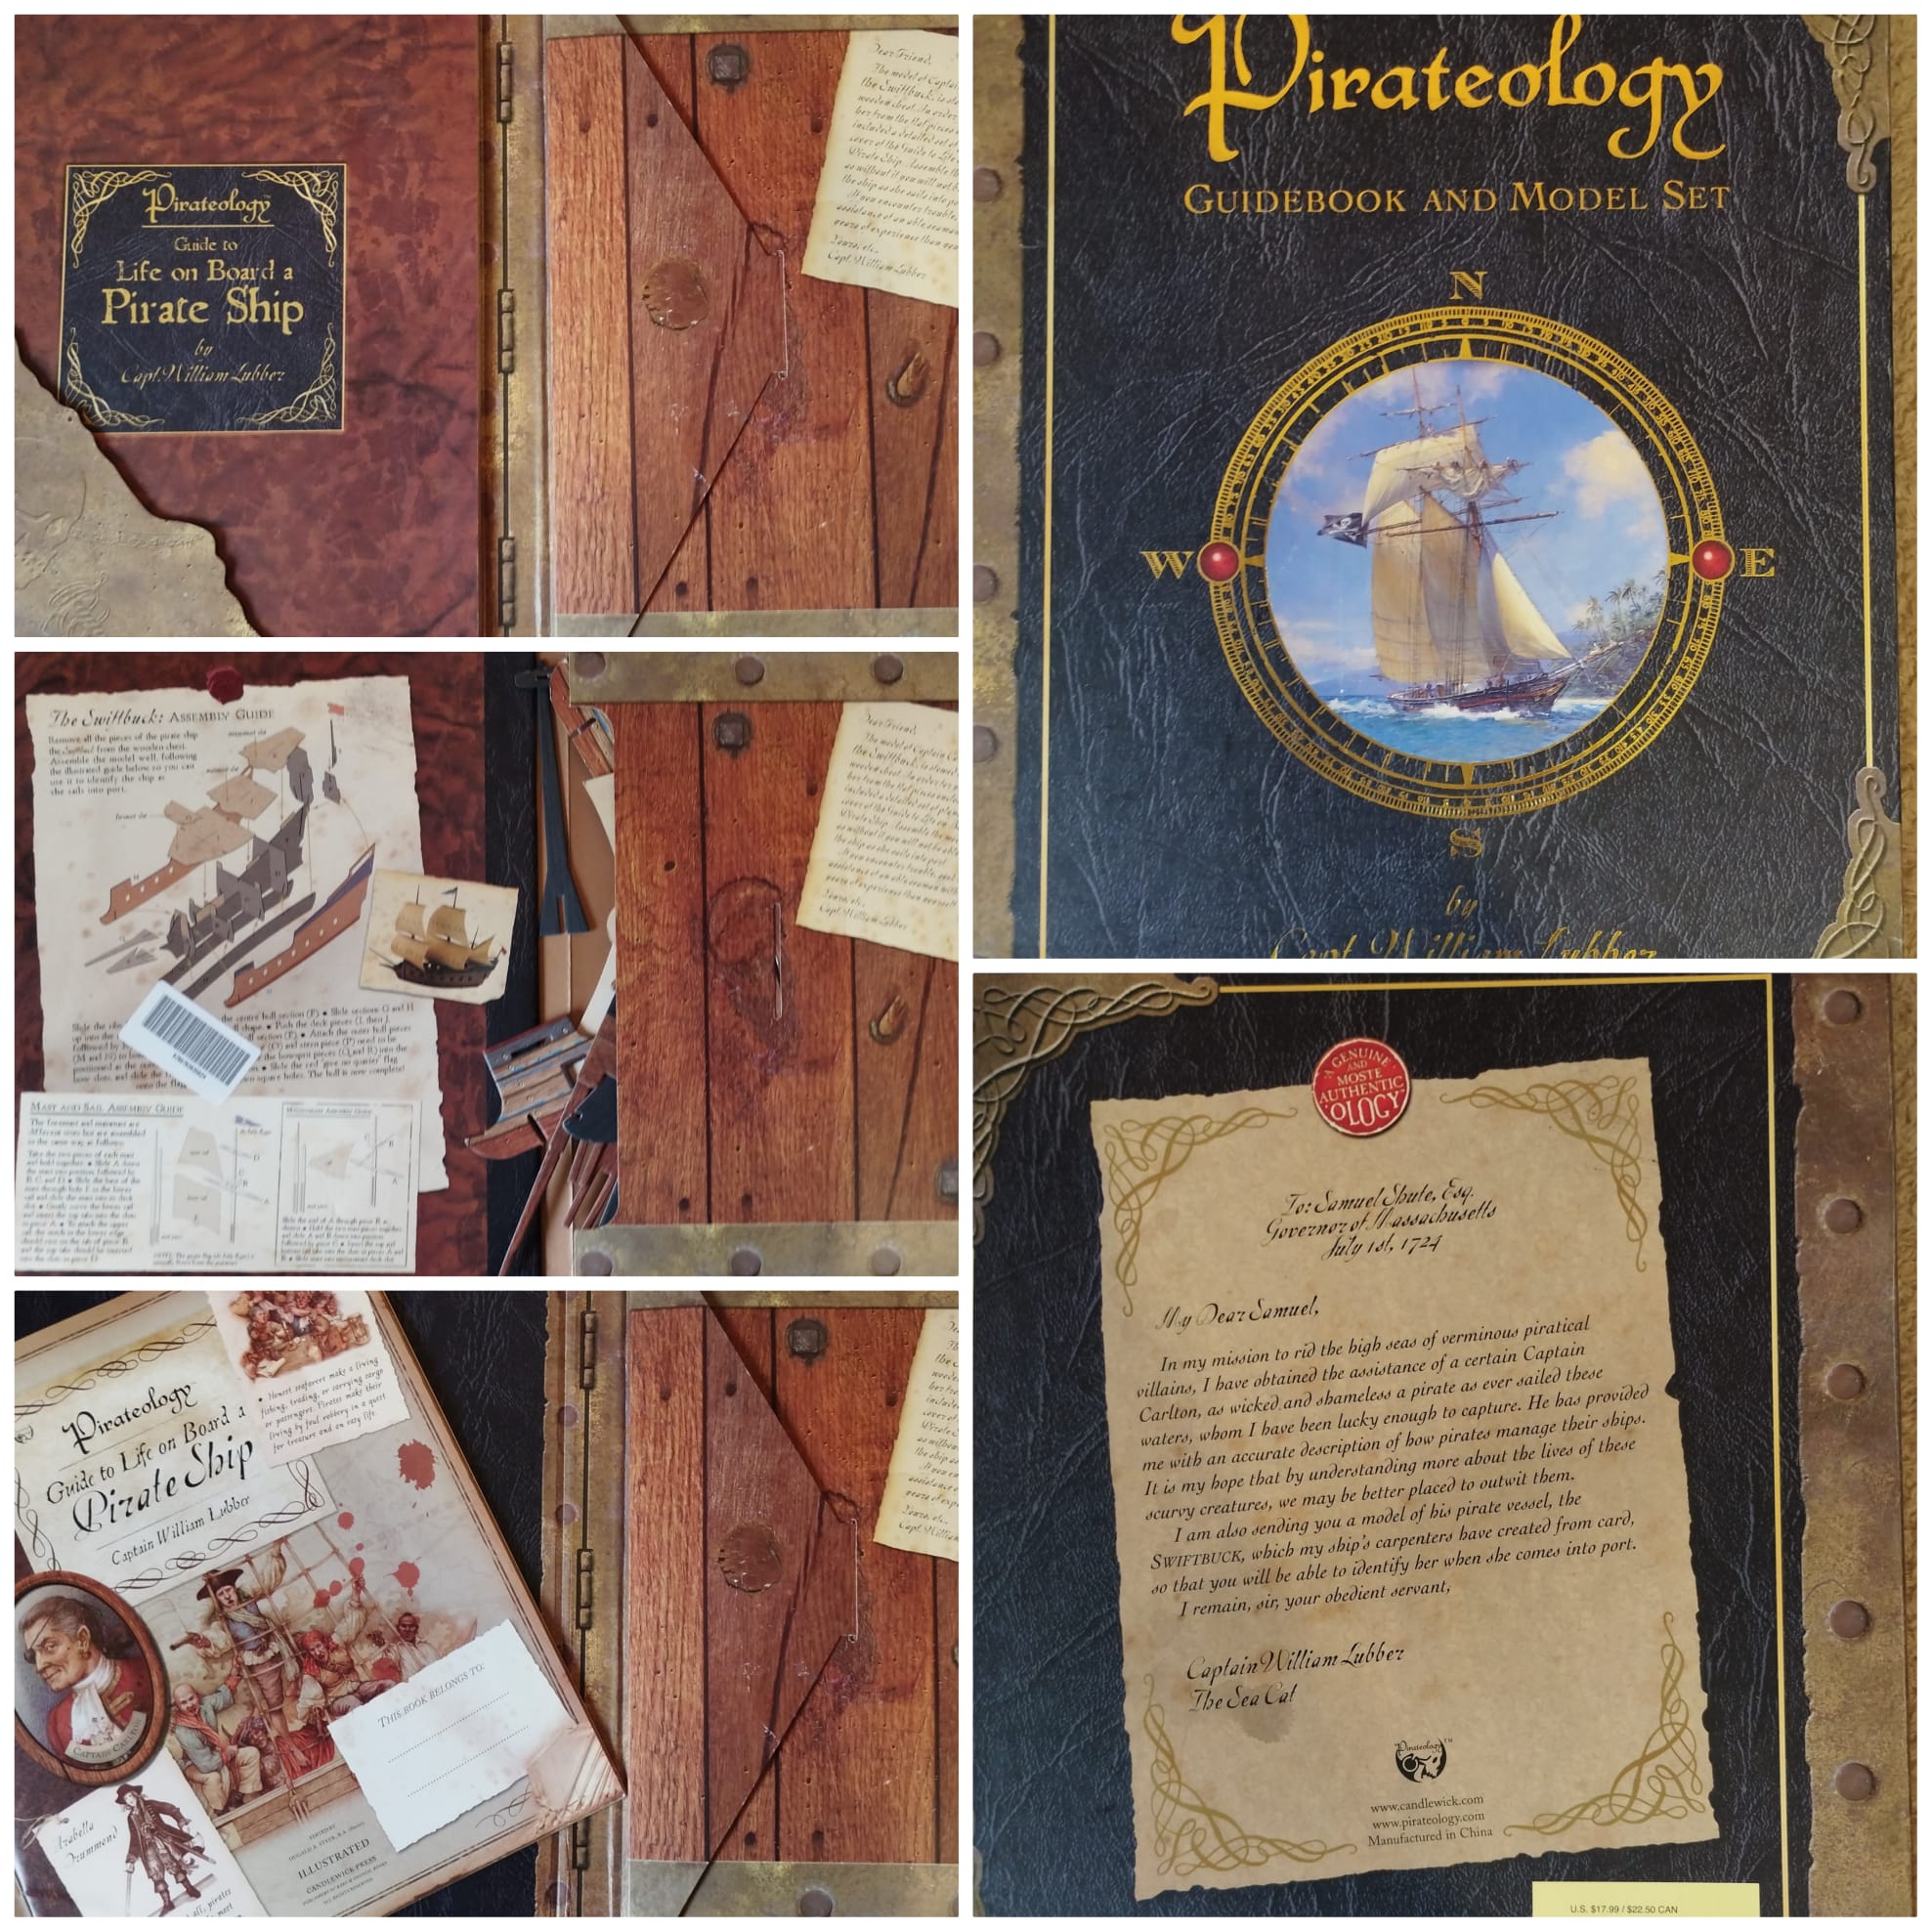 Pirateology A Pirate's Guide and Model Ship Candlewick Press